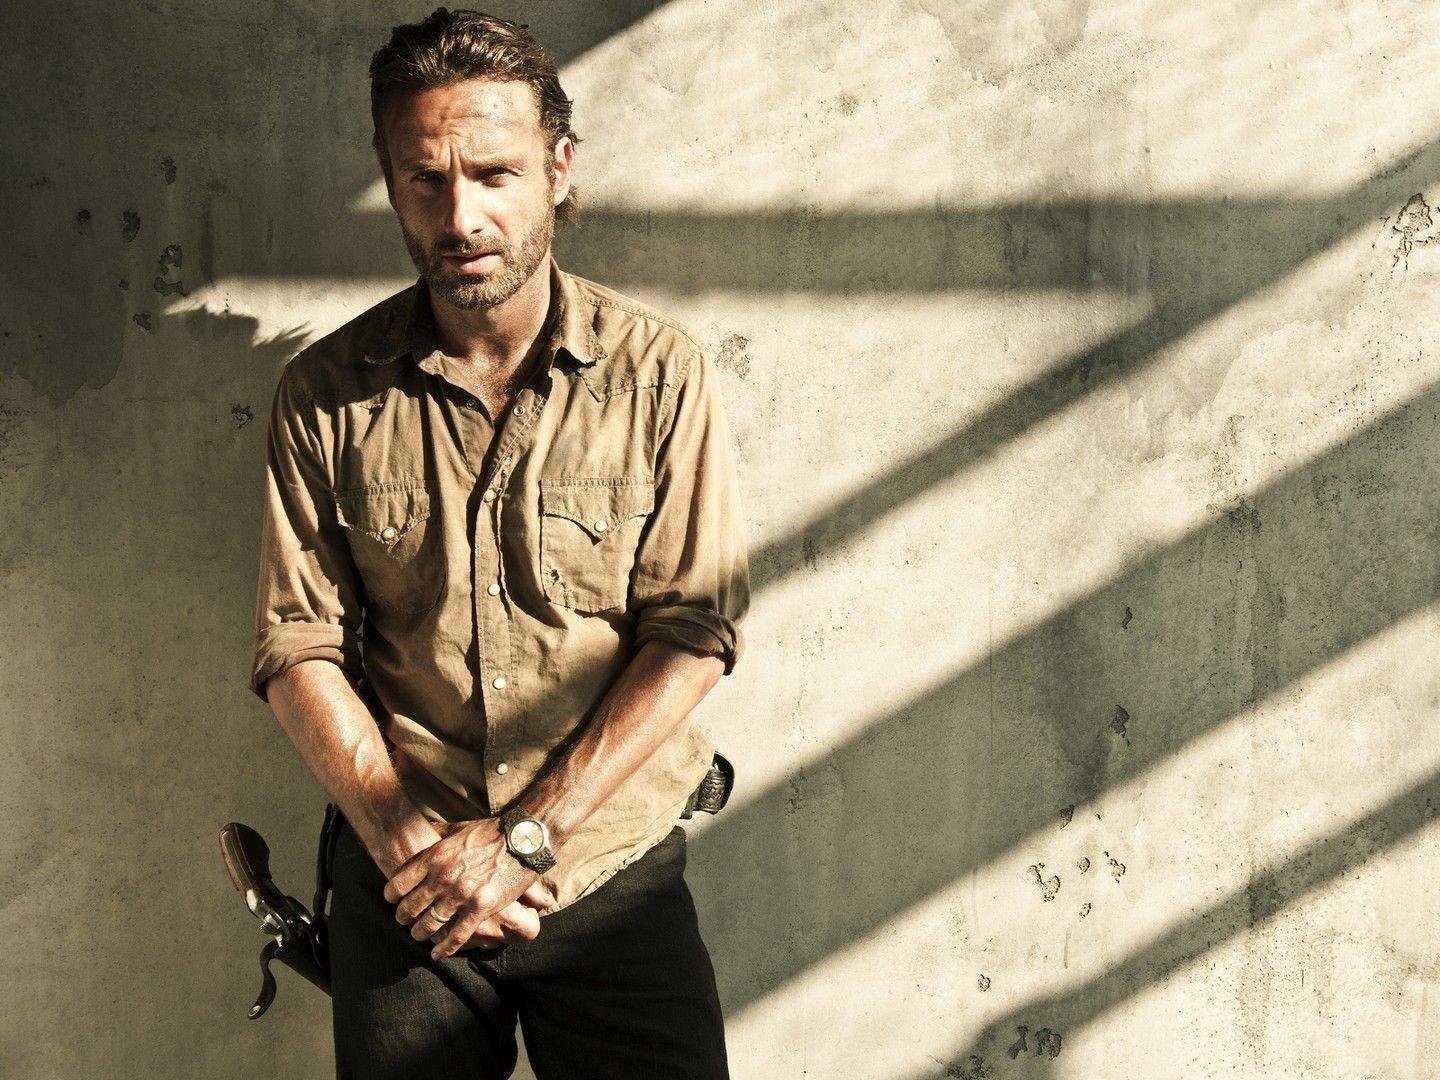 The Walking Dead Andrew Lincoln Wallpapers Wallpaper Cave Images, Photos, Reviews